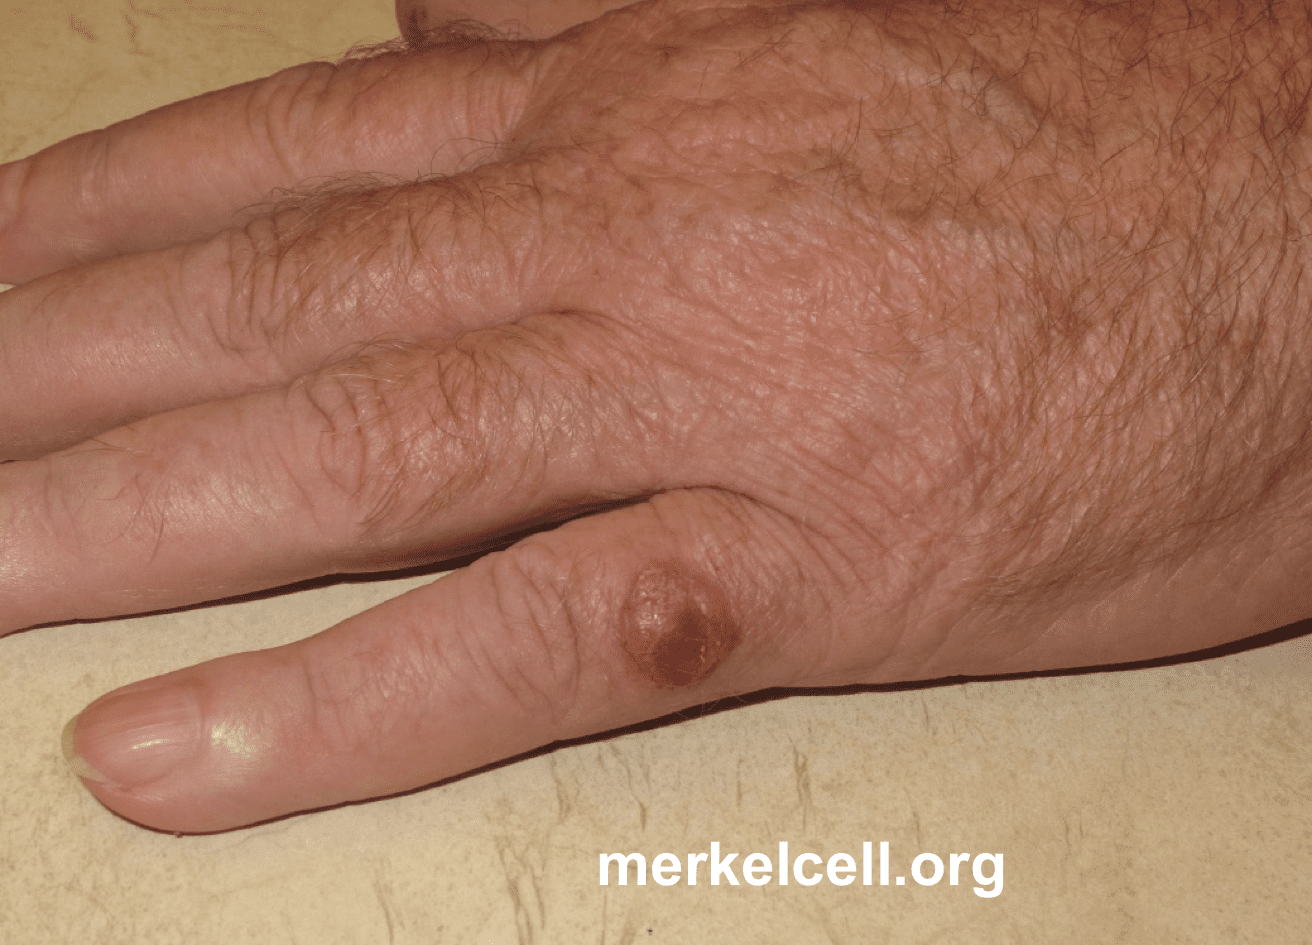 Picture of a Merkel cell carcinoma arising on the fifth digit of the left hand.